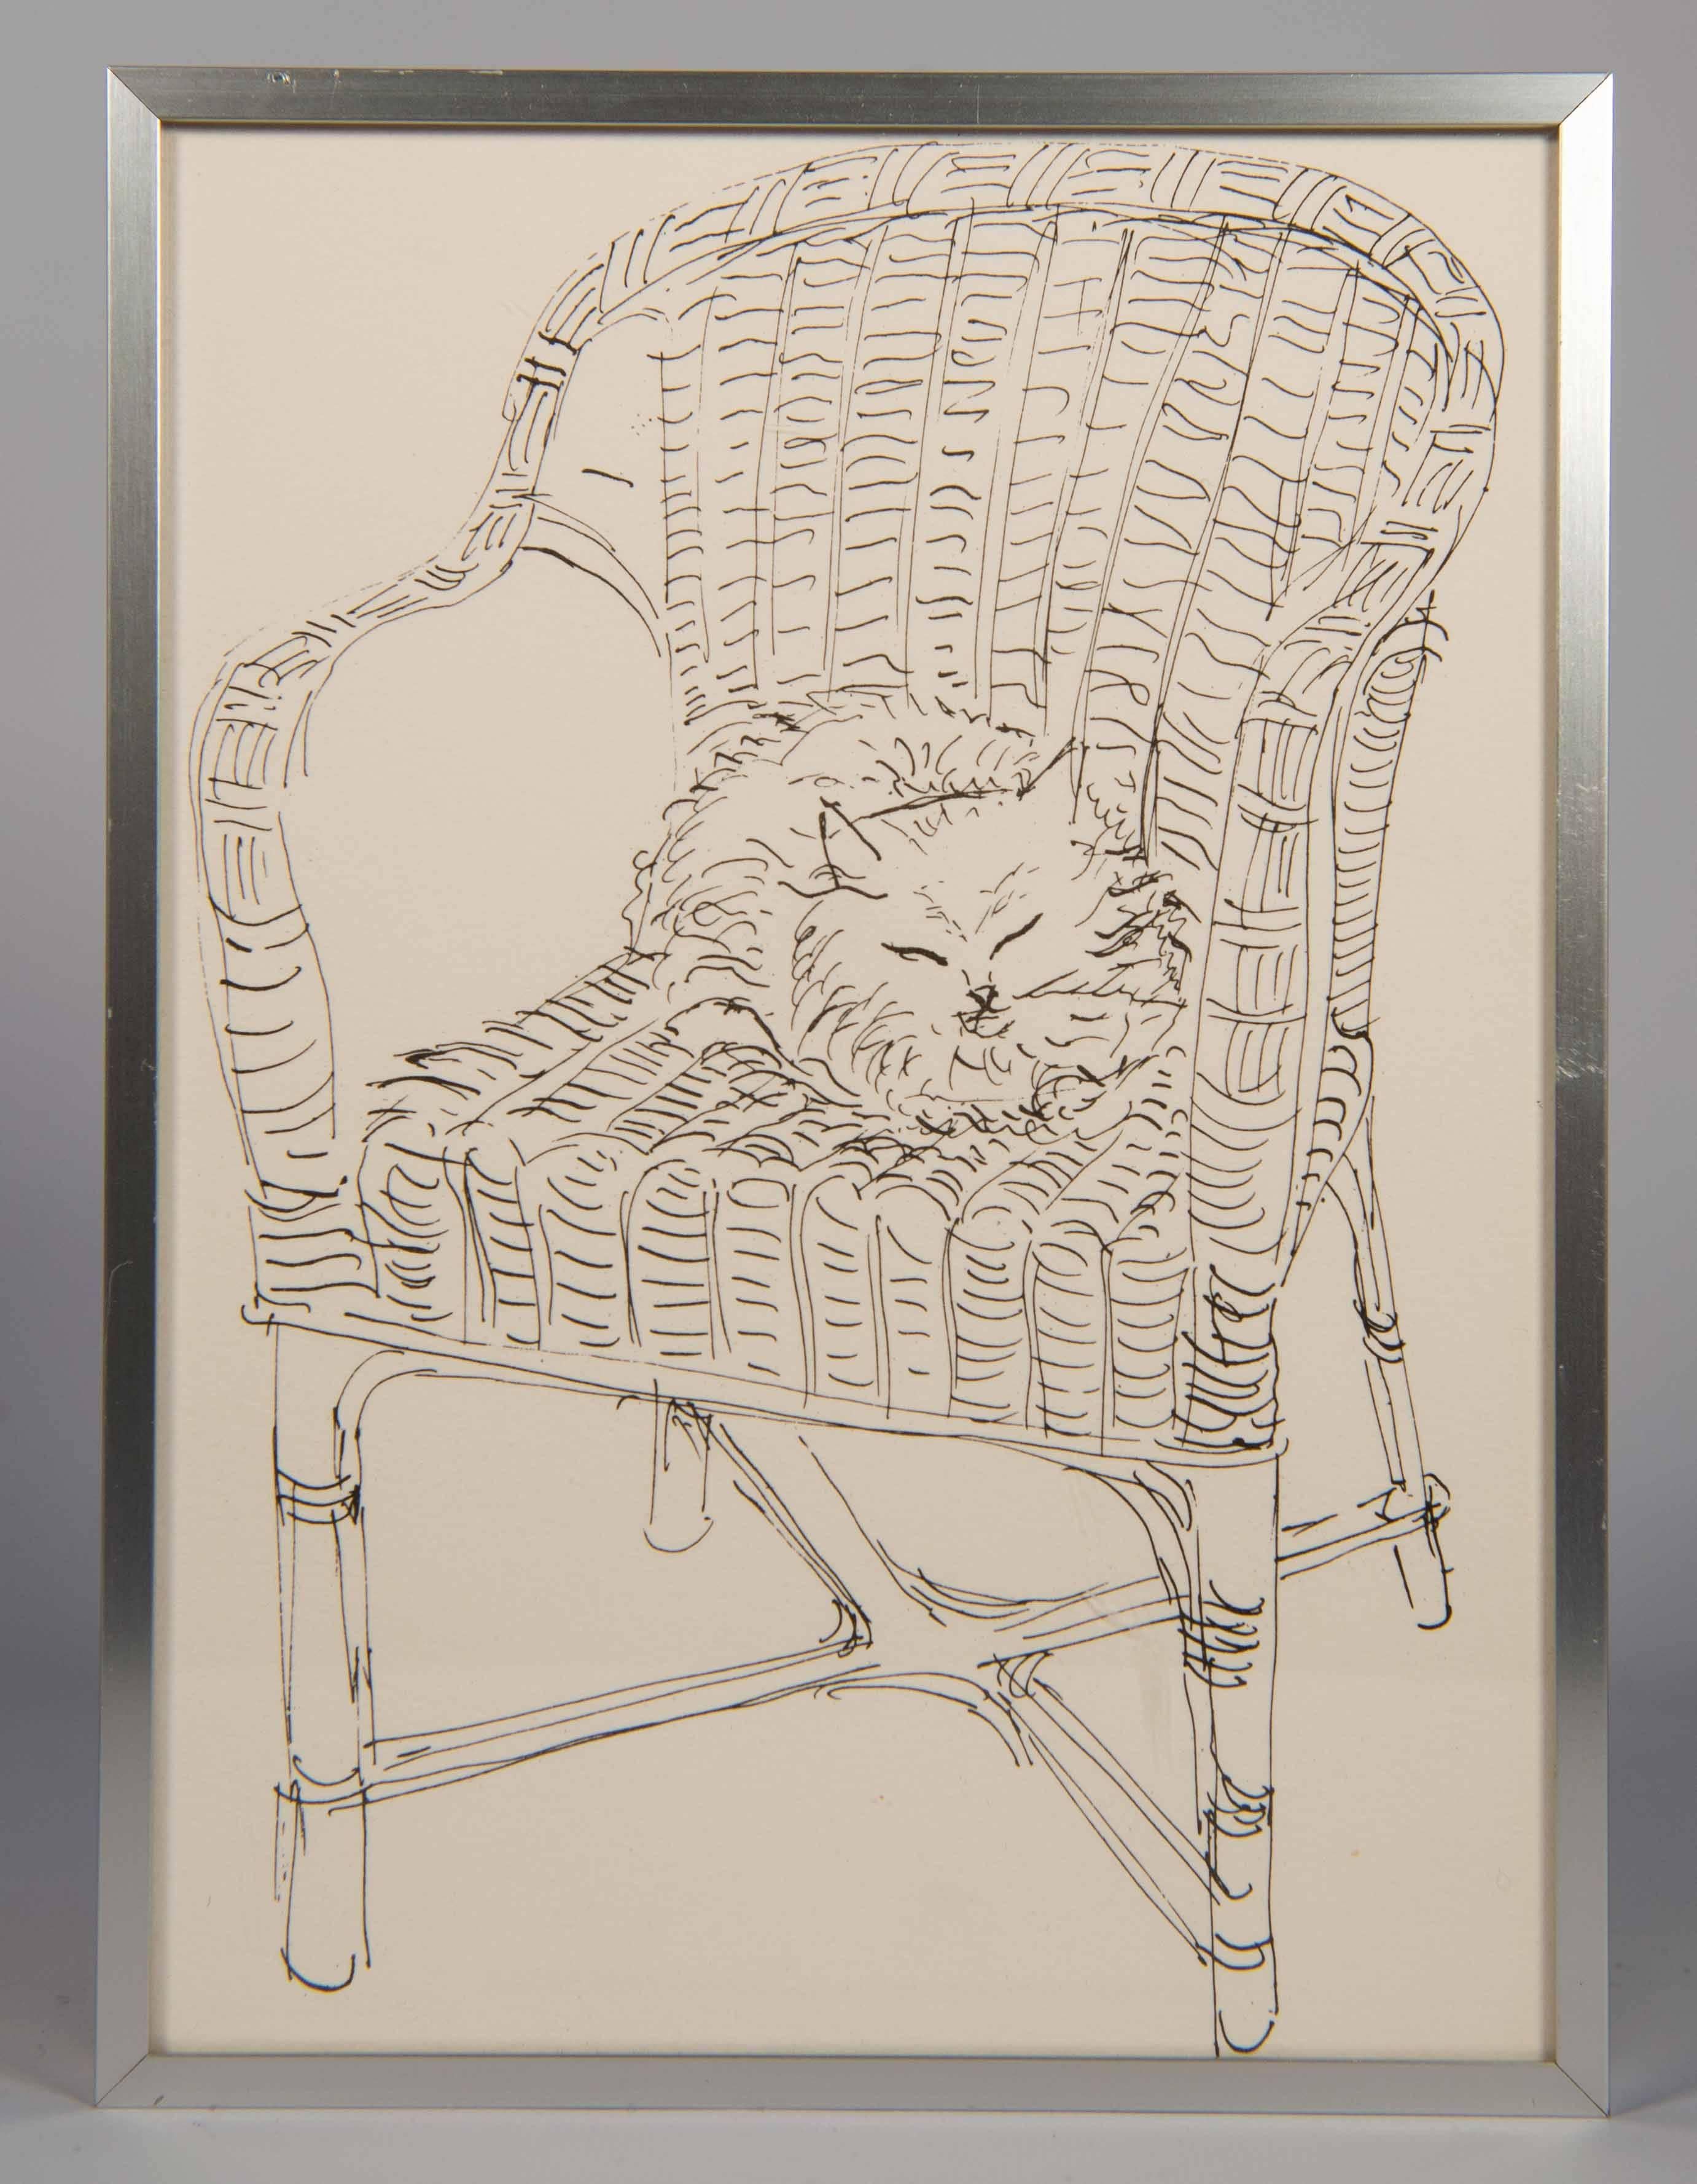 Set of six pen drawing lithographs by Pierre Boncompain. All of them were made circa 1980-1984 and signed and dated on the back. They are stored in Schleiper frames. 

- Cat on the sofa
- Lady lying down
- Chair with fruit basket
- Thinking